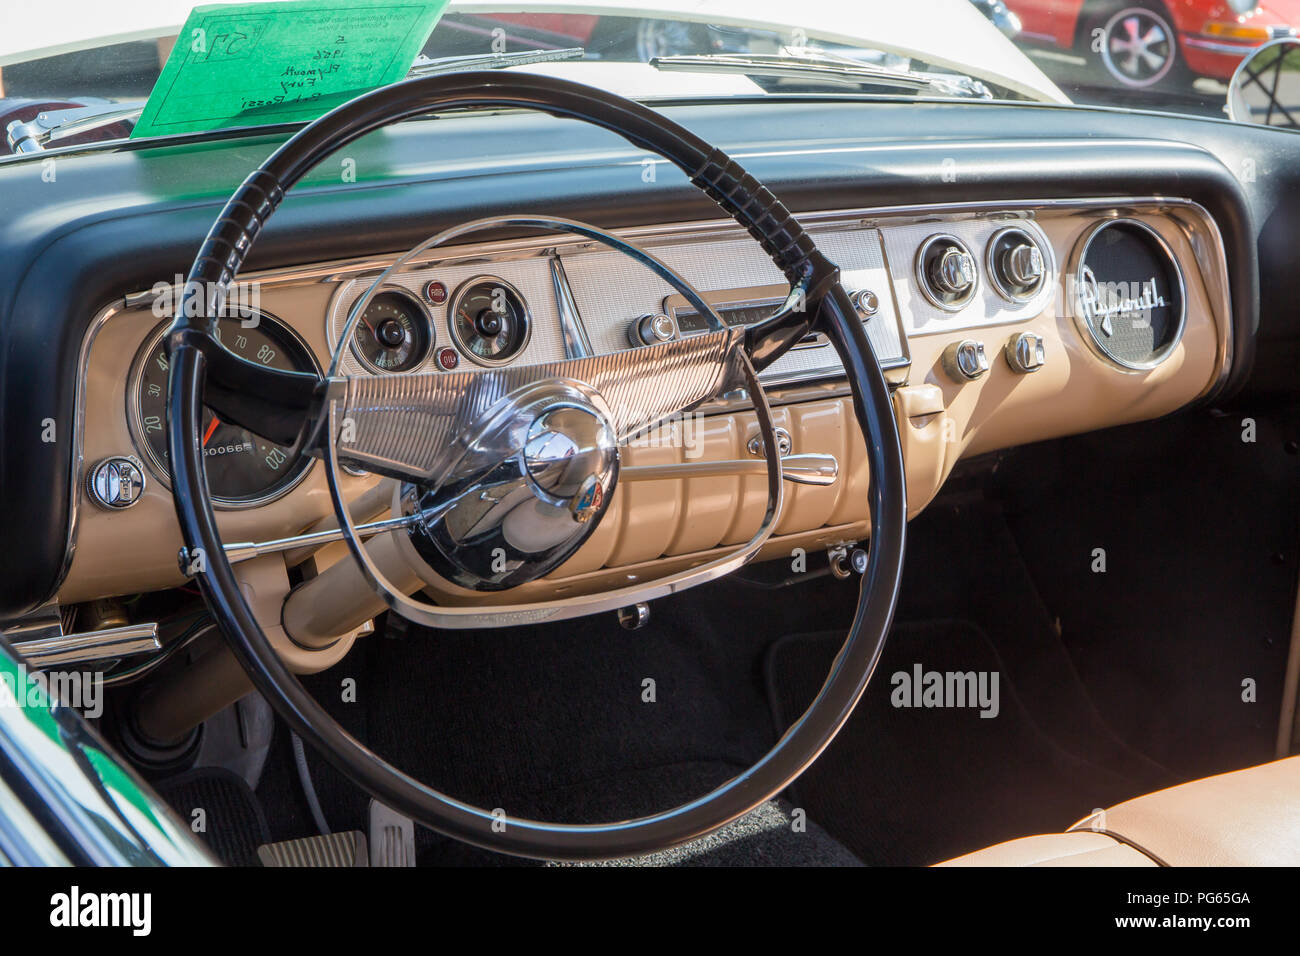 MATTHEWS, NC - September 4, 2017:  Interior of a 1956 Plymouth Fury on display at the Matthews Auto Reunion & Motorcycle Show. Stock Photo